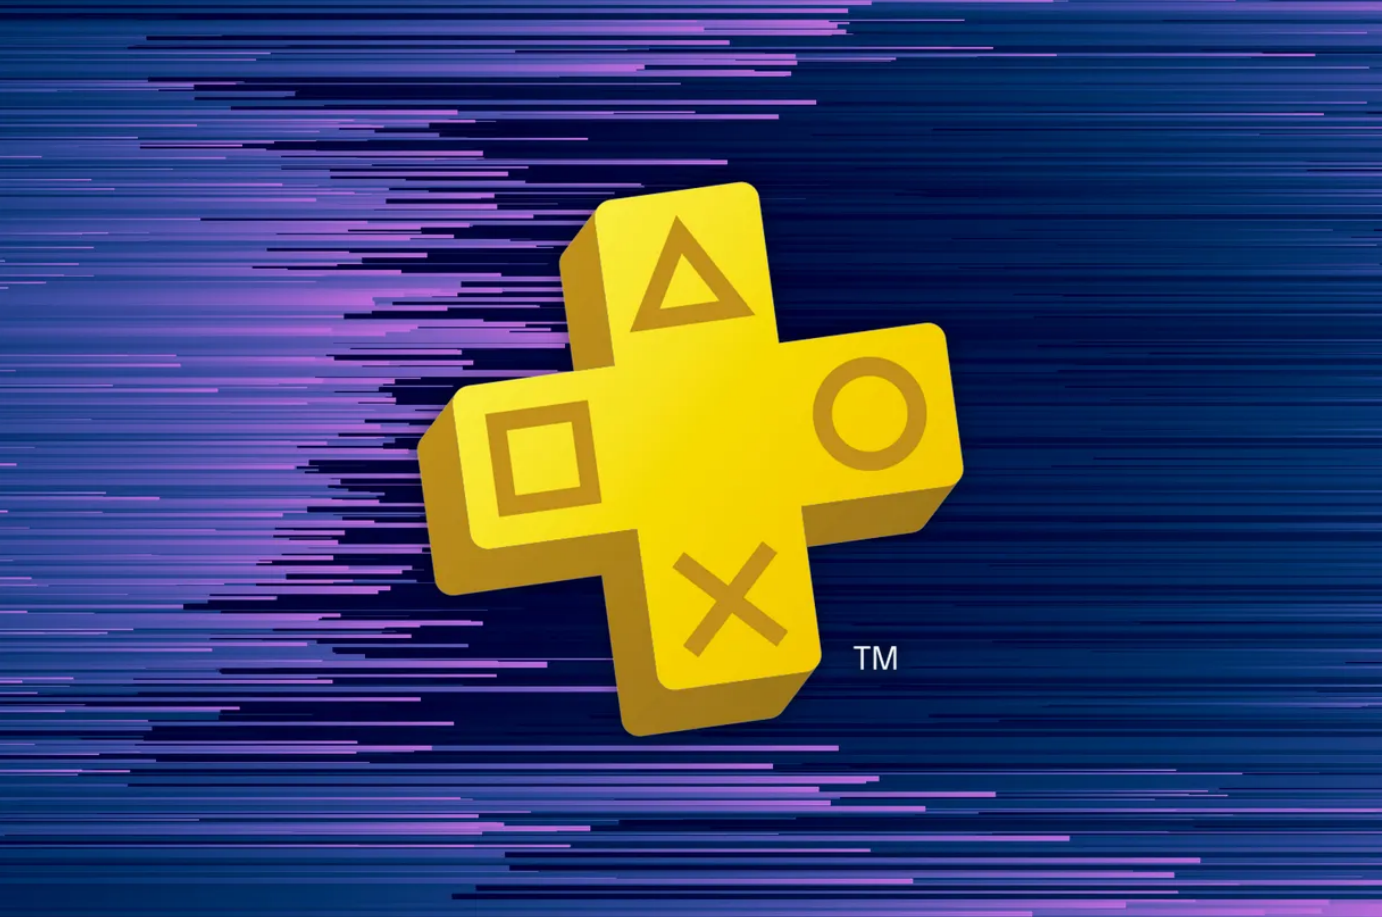 PS Plus Extra and Premium games for May 2023 have been revealed